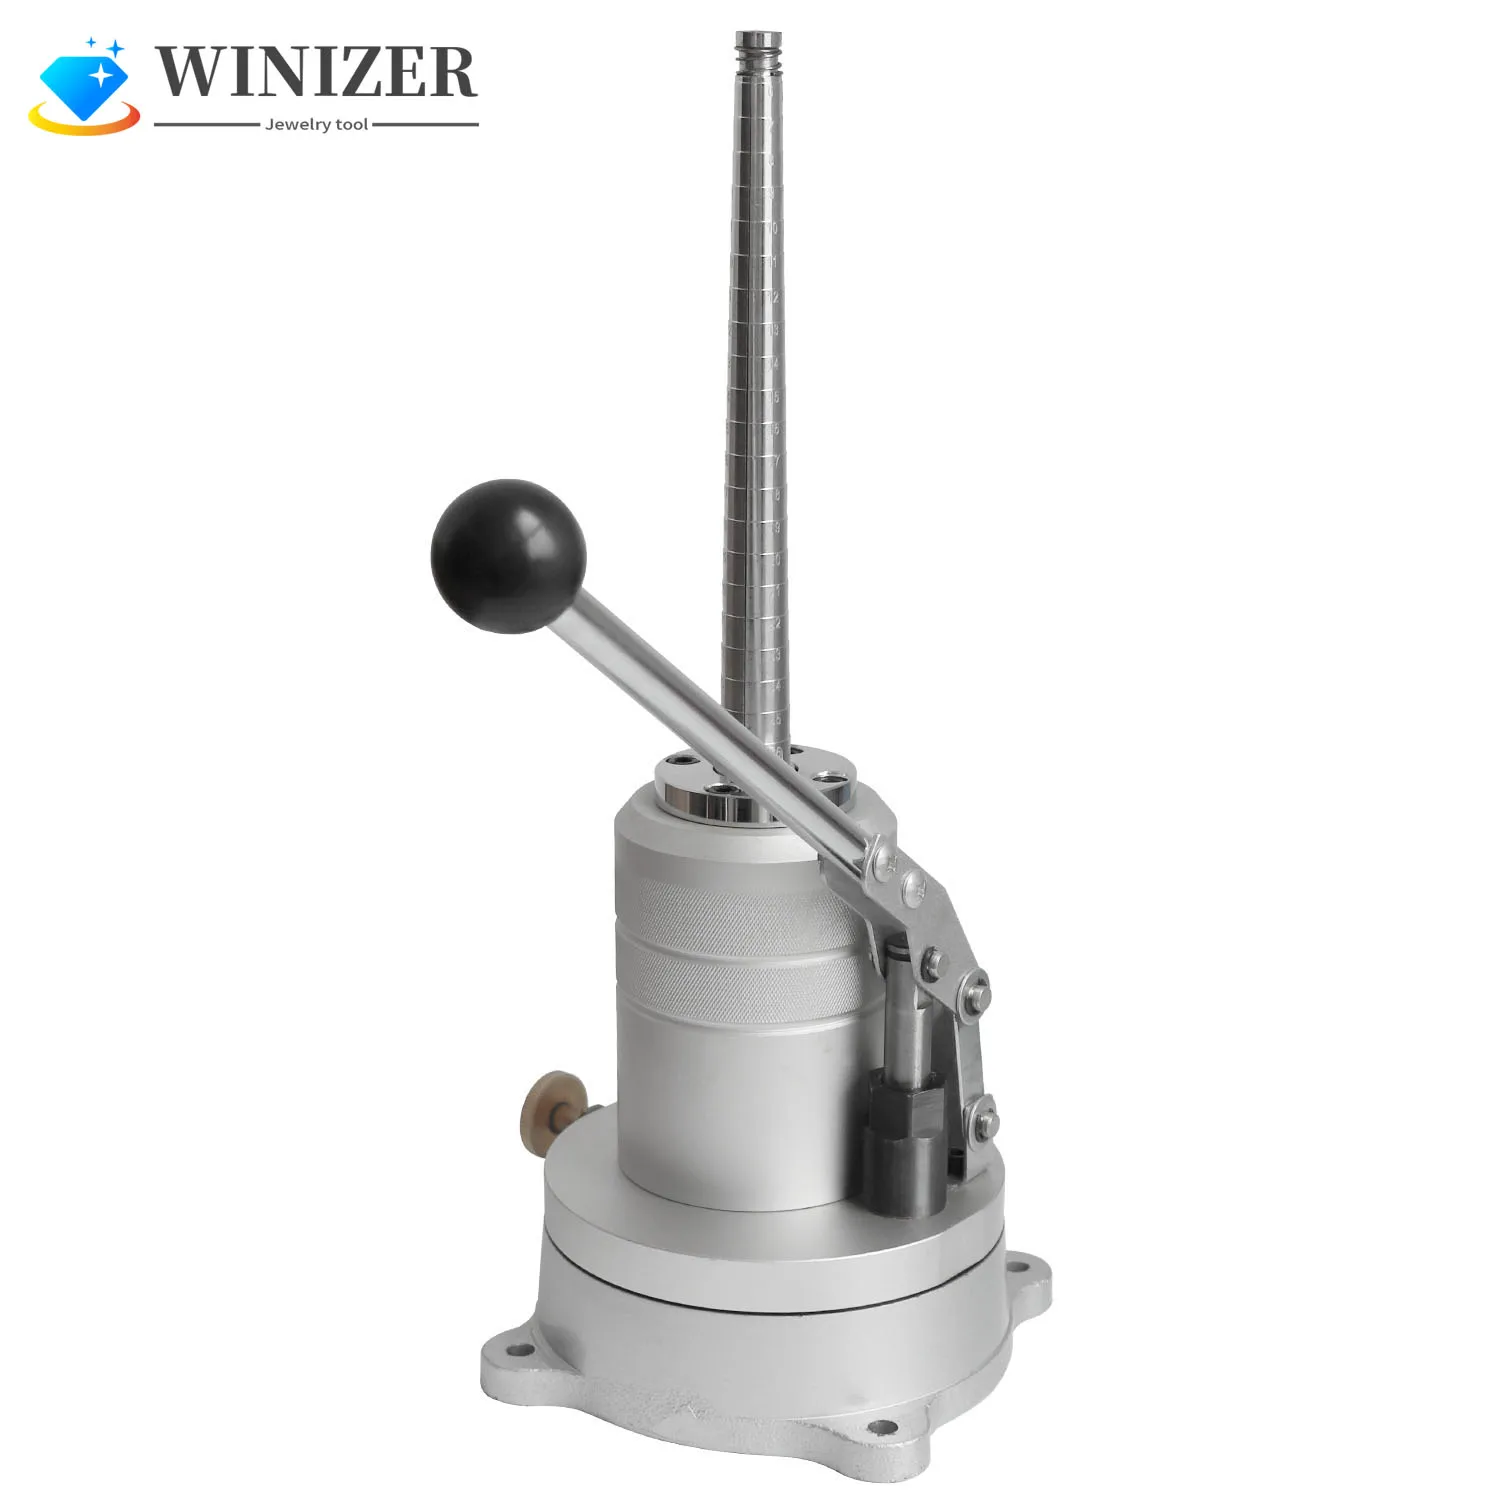 Ring Stretcher And Reducer with Size 6-26 Ring Size Adjustment Tool Enlarger Adjustment Change Forming for Jewelry Repair Store